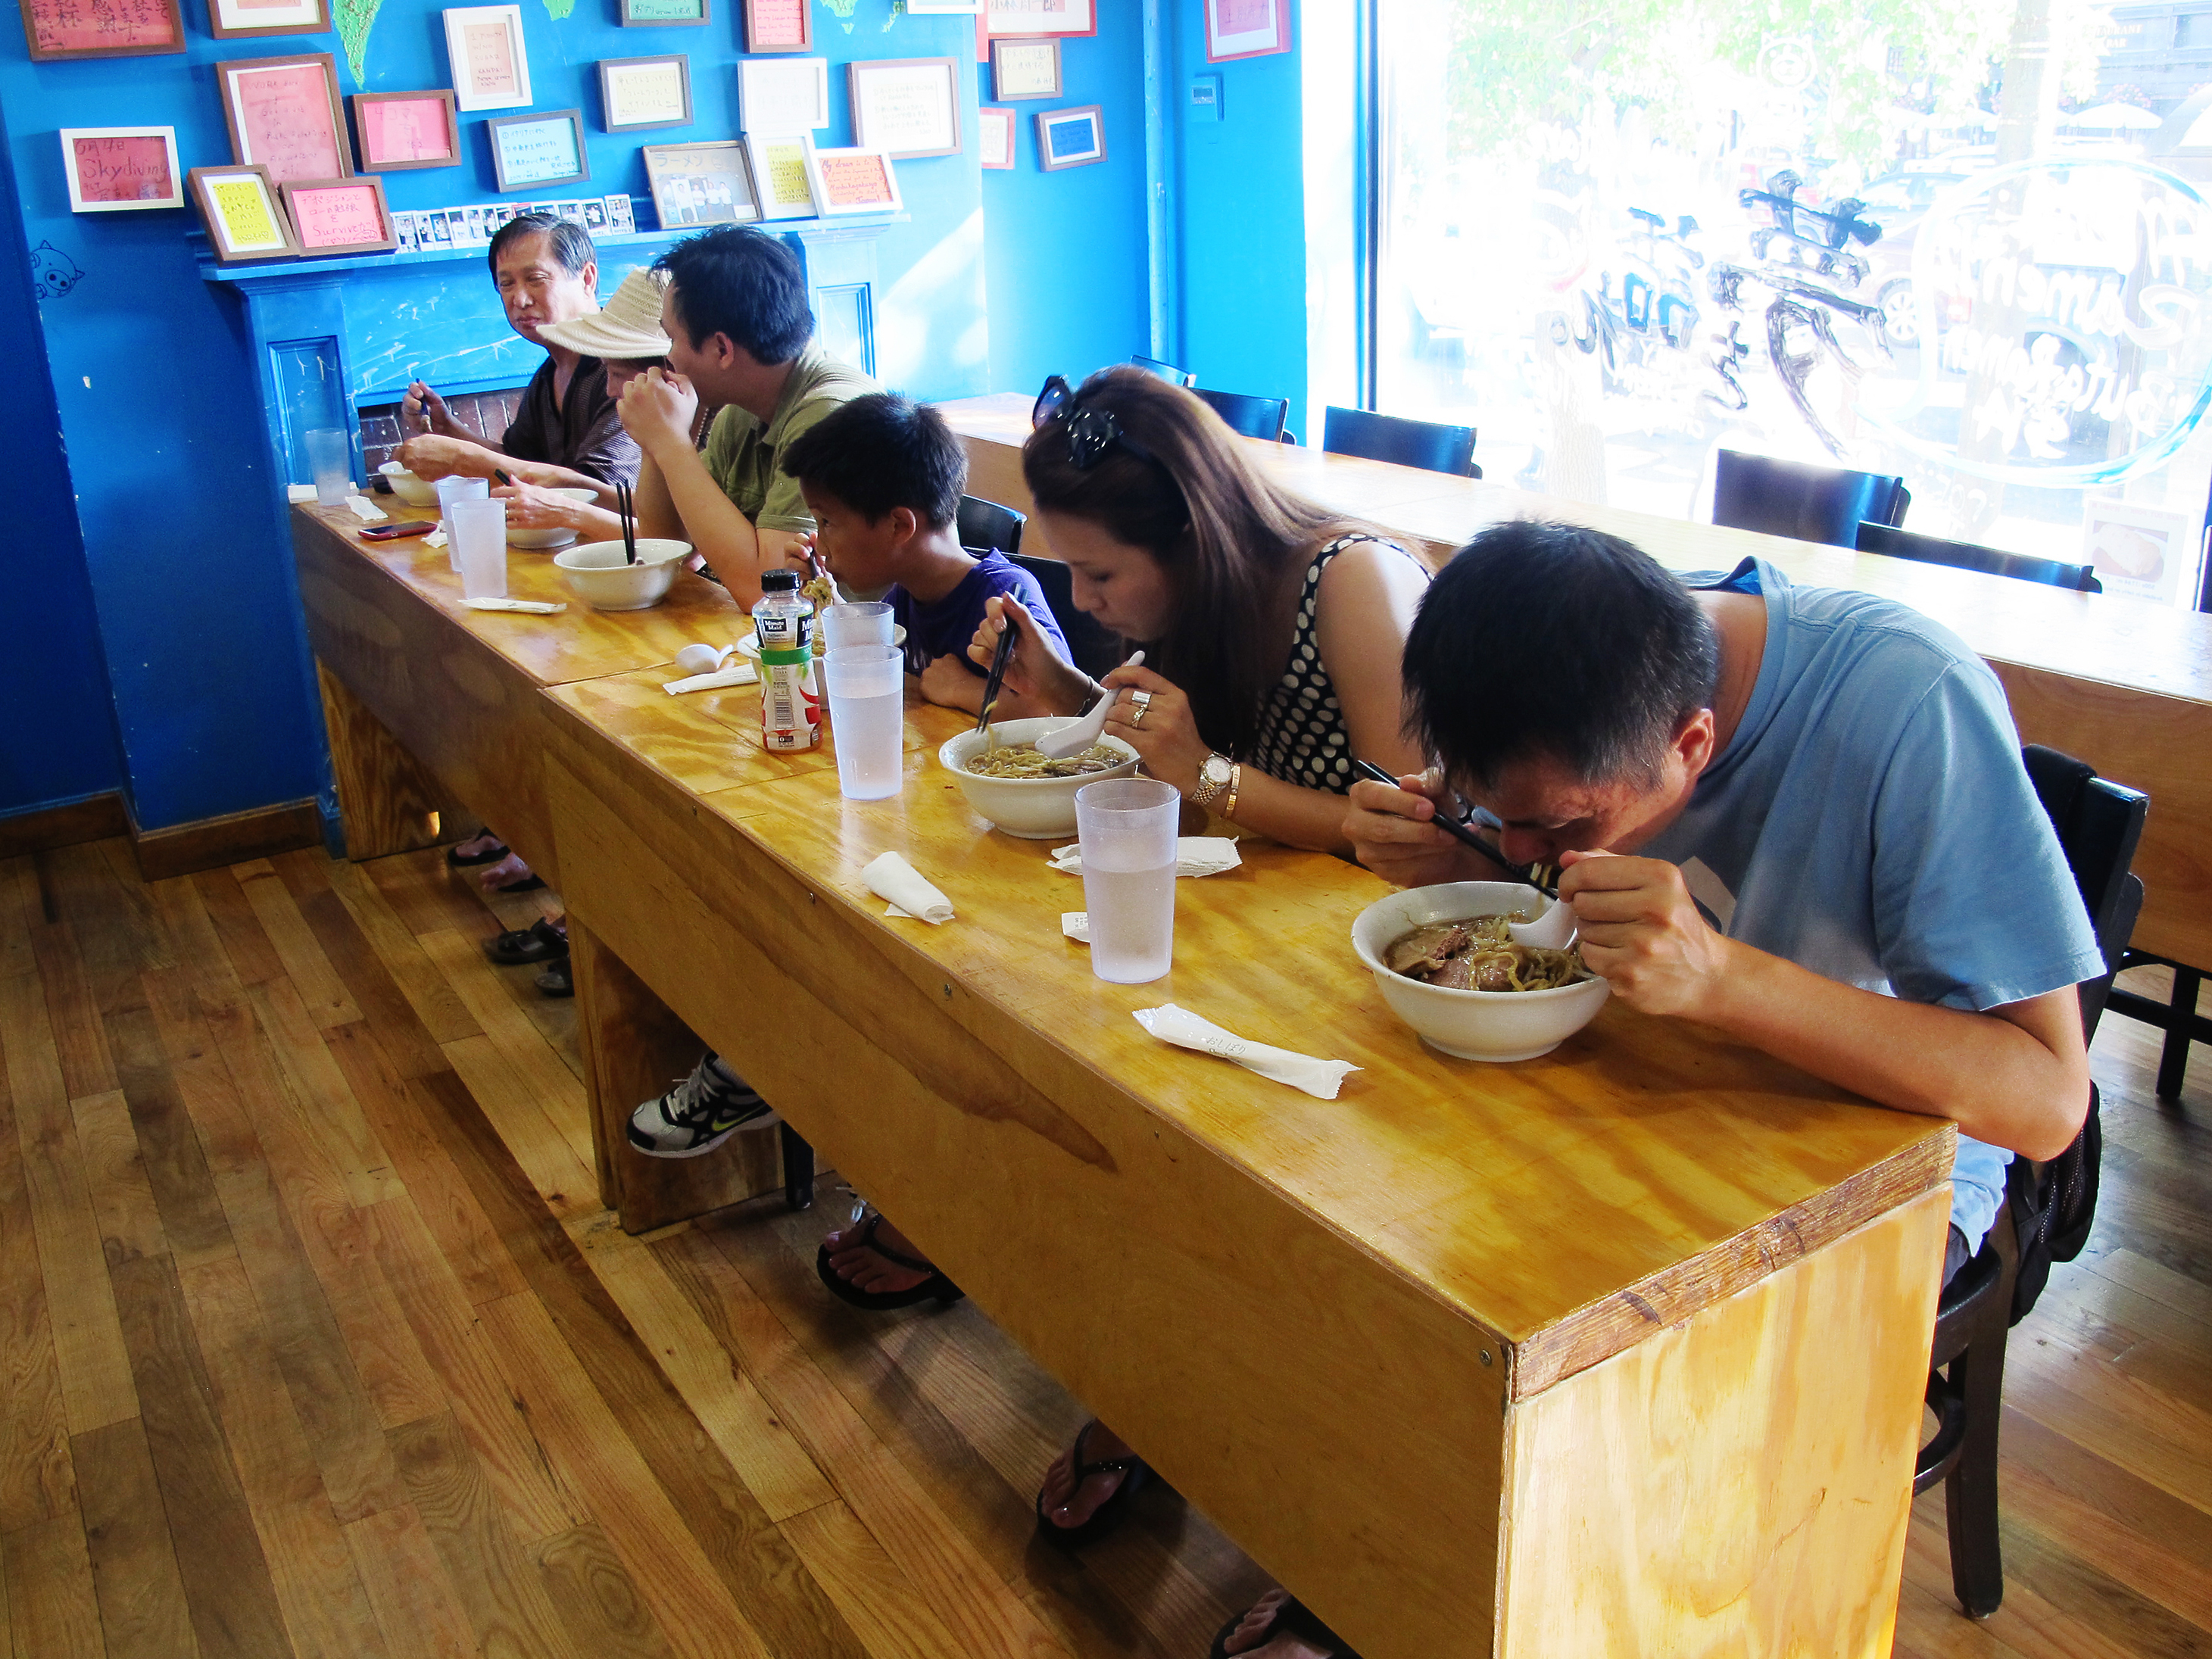 At this shop, finishing the huge, rich bowls of ramen requires fortitude and deep concentration. Photo: Andrea Shea for WBUR